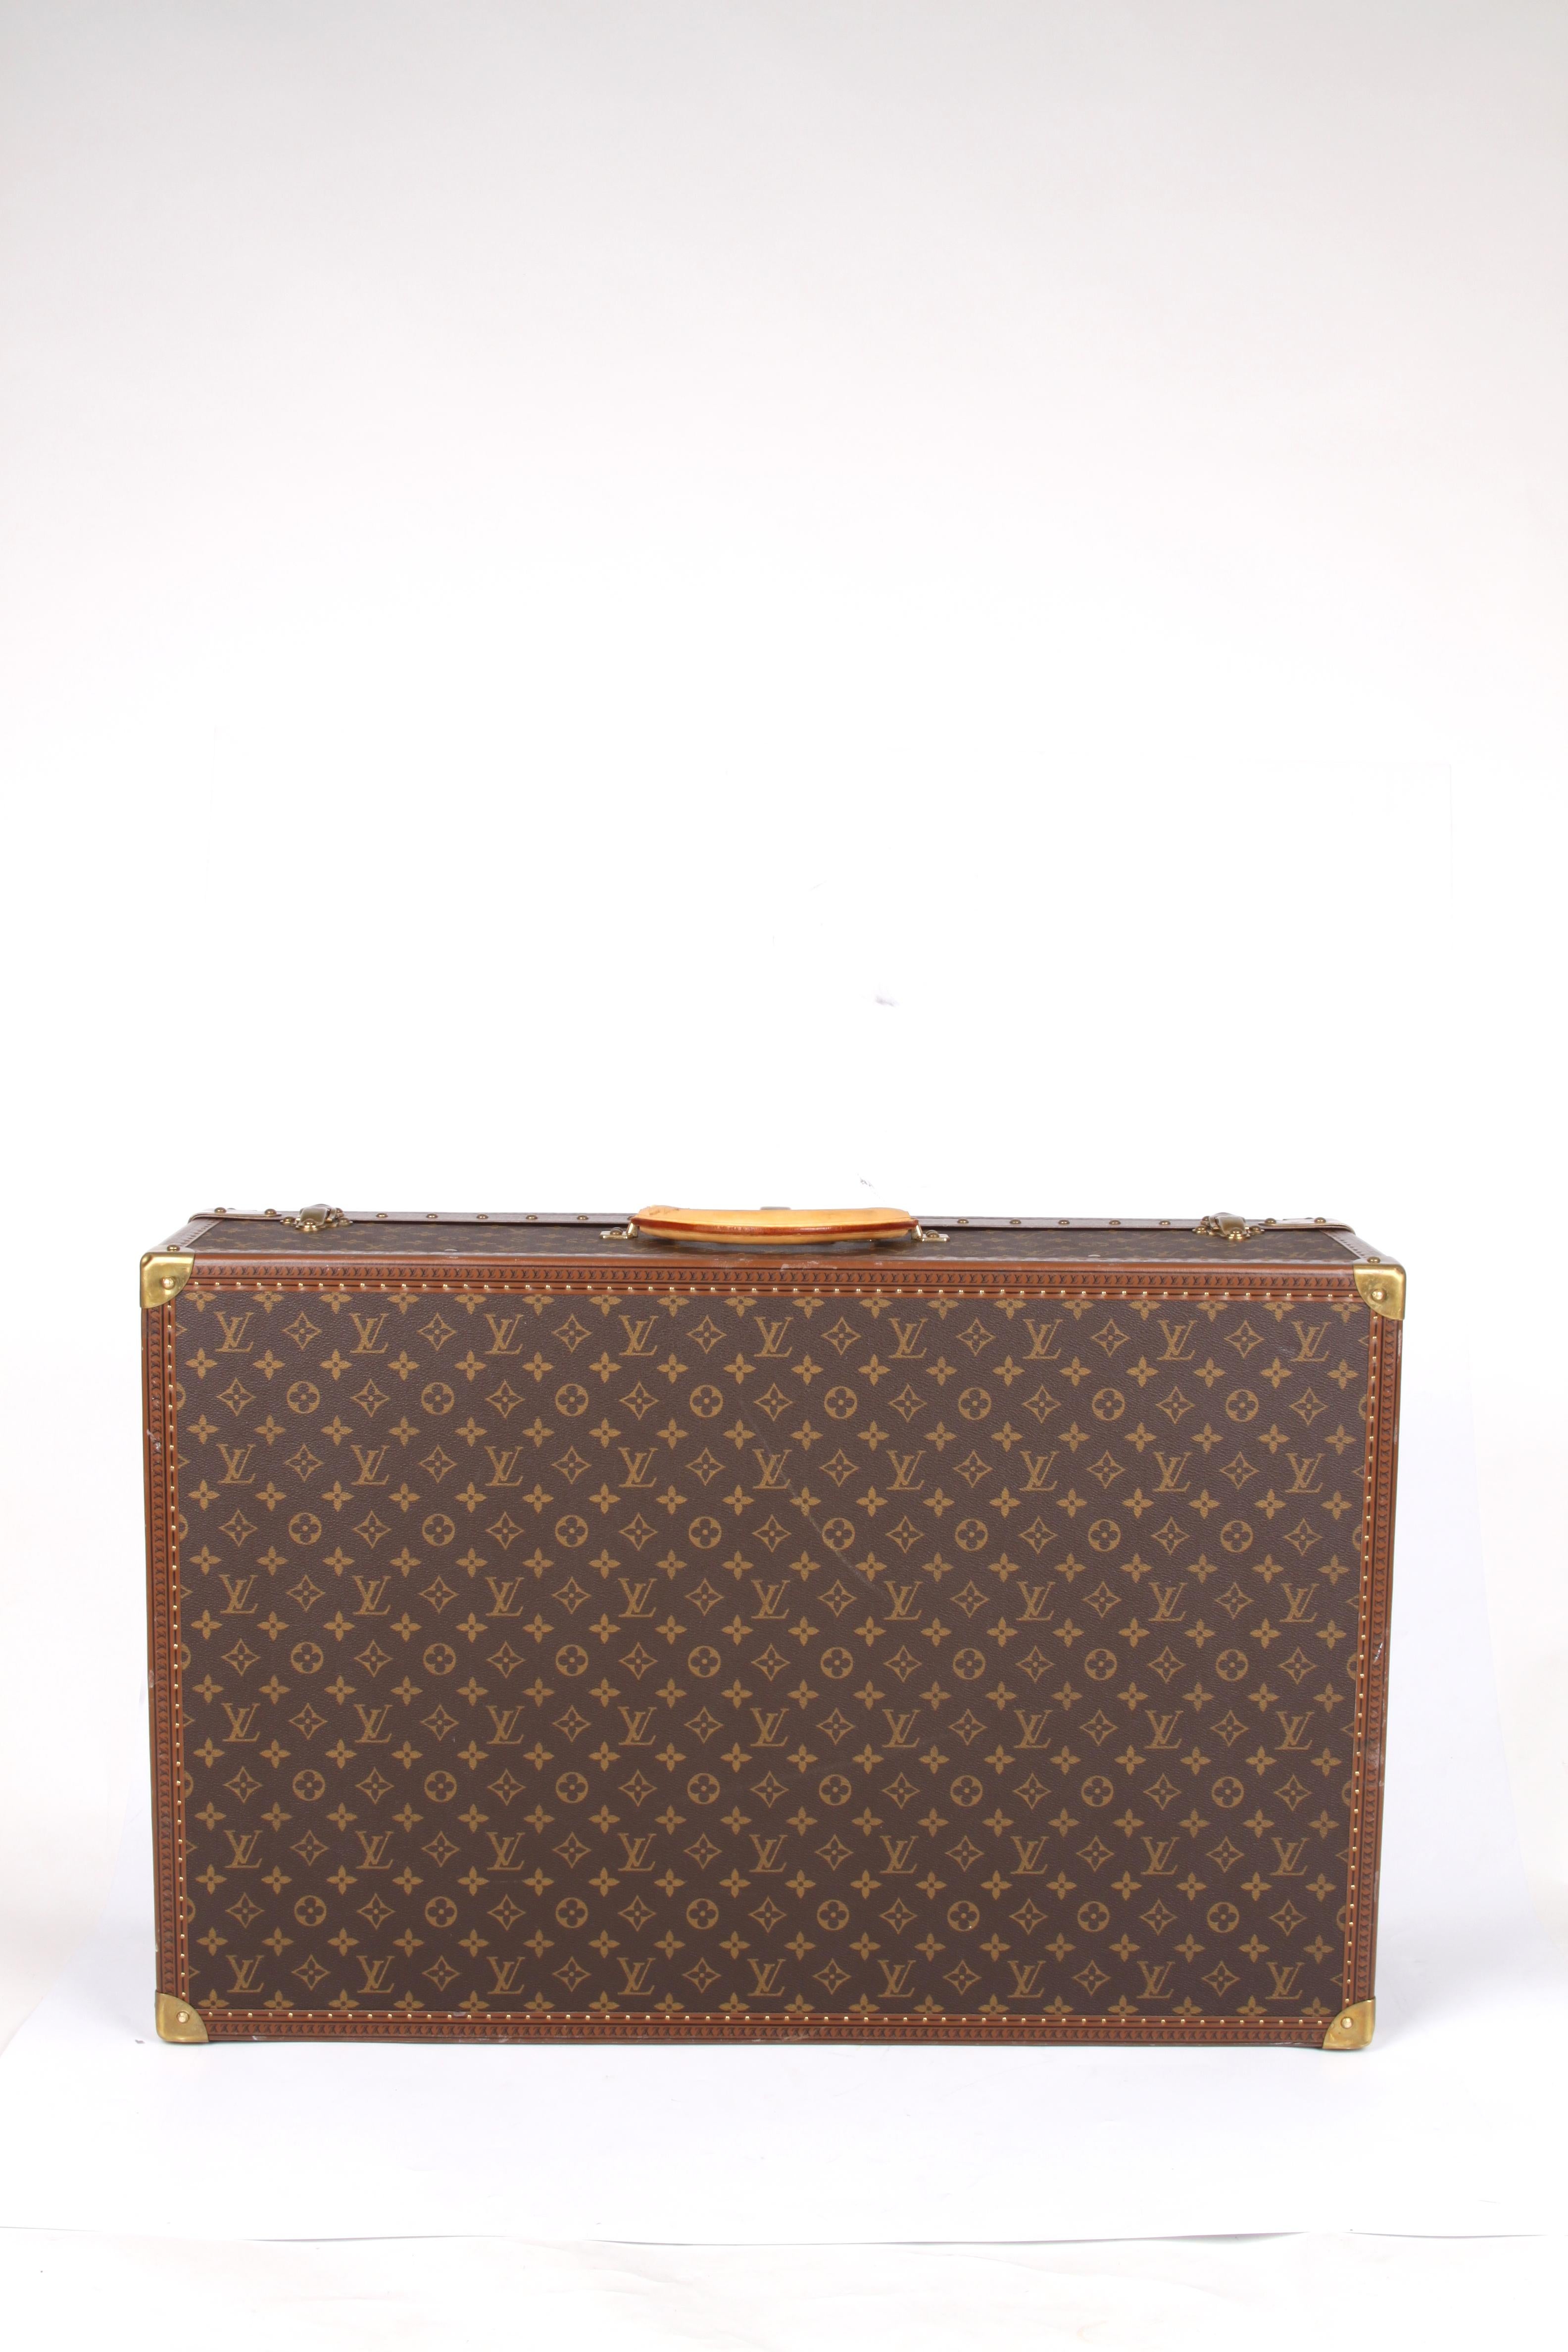 Rather large size suitcase, of course executed in the welknown dark brown canvas covered with LV monograms. Garnished with natural-tone leather and copper-tone hardware. The lid has as much as three locks, a luggage label can be found on the leather